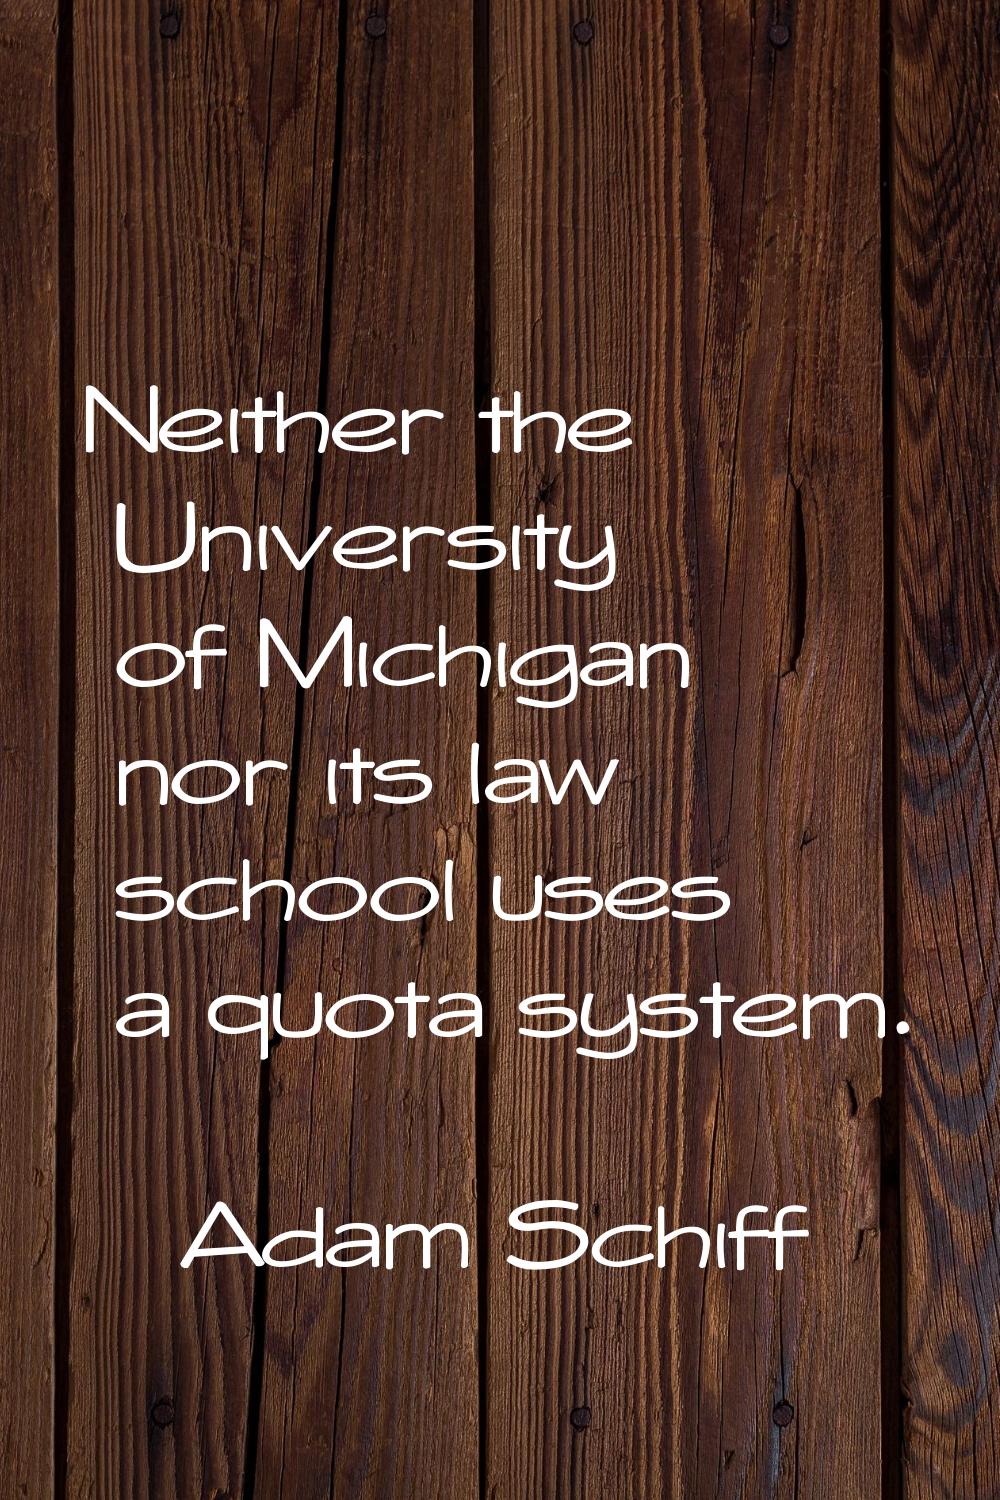 Neither the University of Michigan nor its law school uses a quota system.